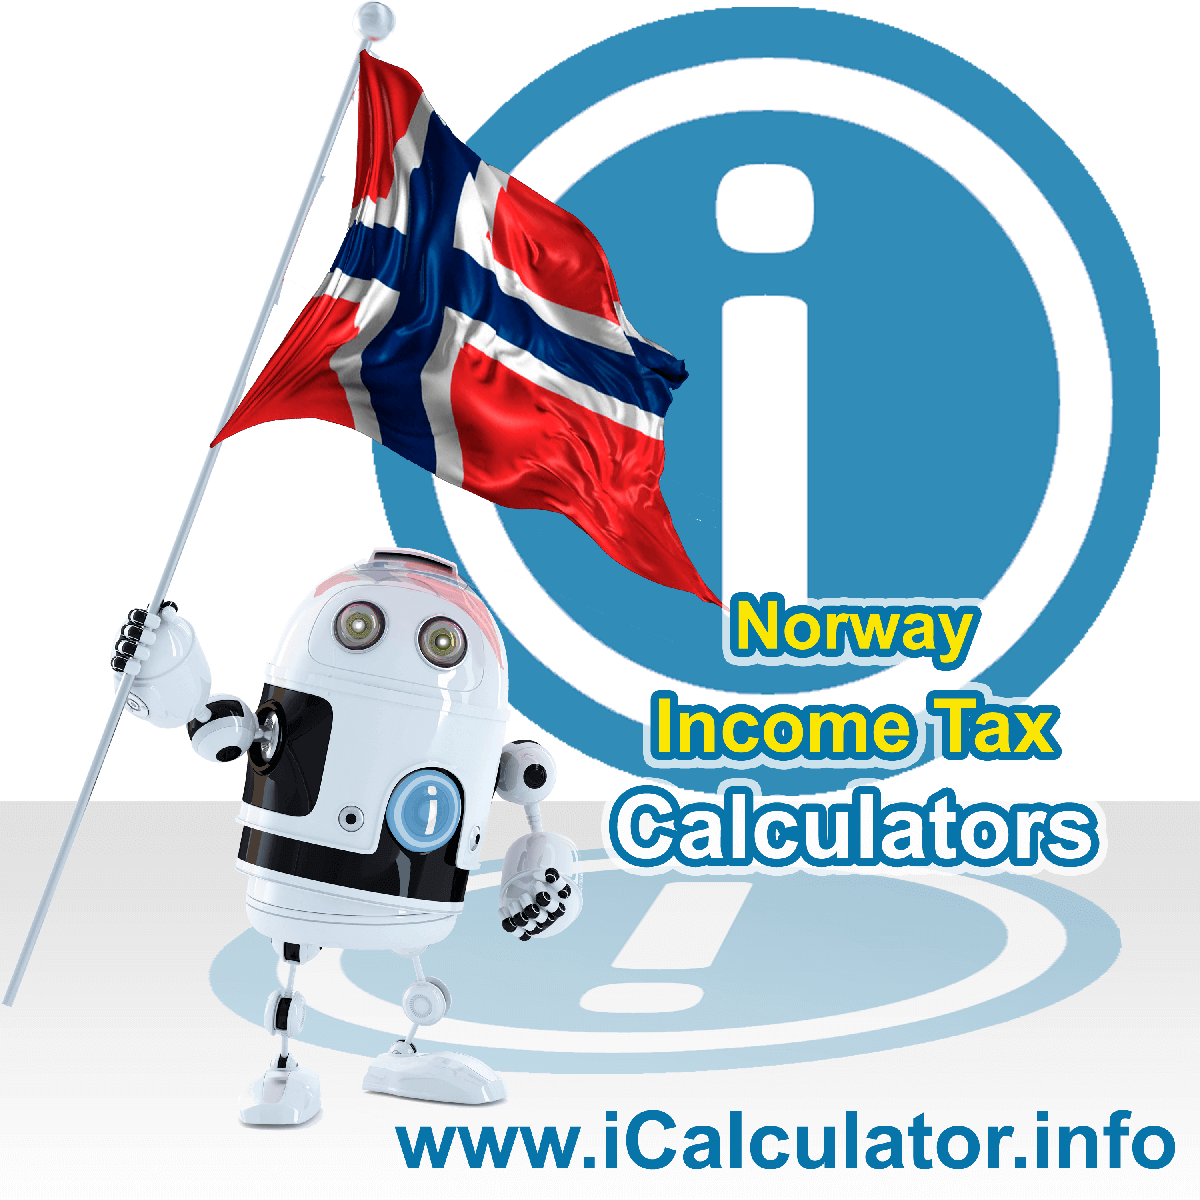 Norway Income Tax Calculator. This image shows a new employer in Norway calculating the annual payroll costs based on multiple payroll payments in one year in Norway using the Norway income tax calculator to understand their payroll costs in Norway in 2023